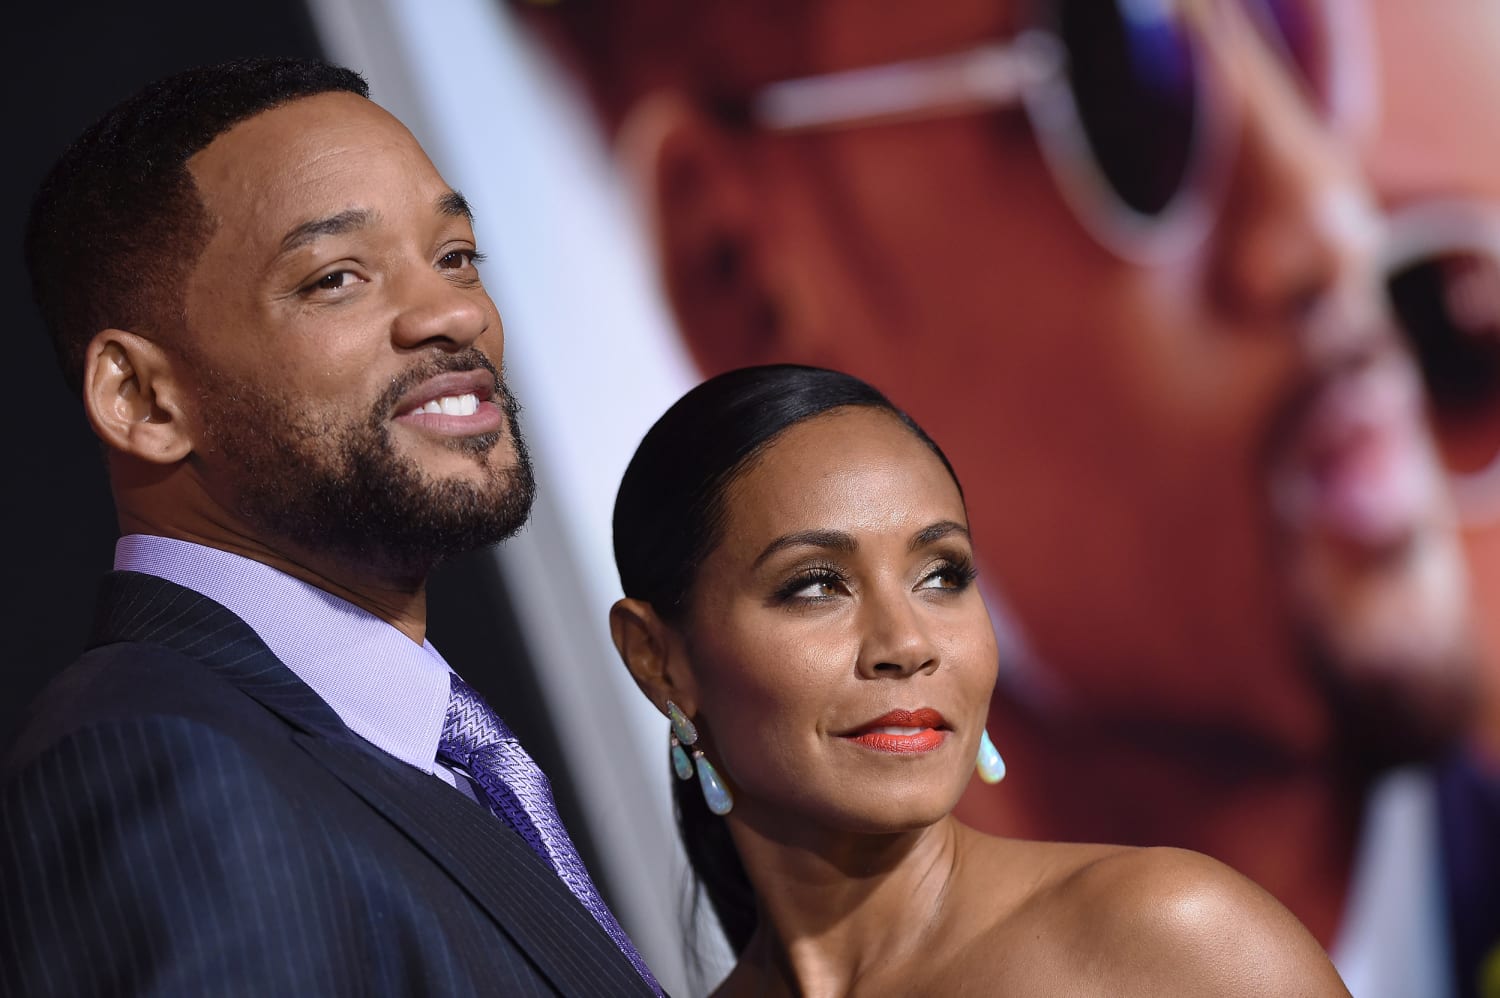 Jada Pinkett Smith On Twitter There S Some Healing That Needs To